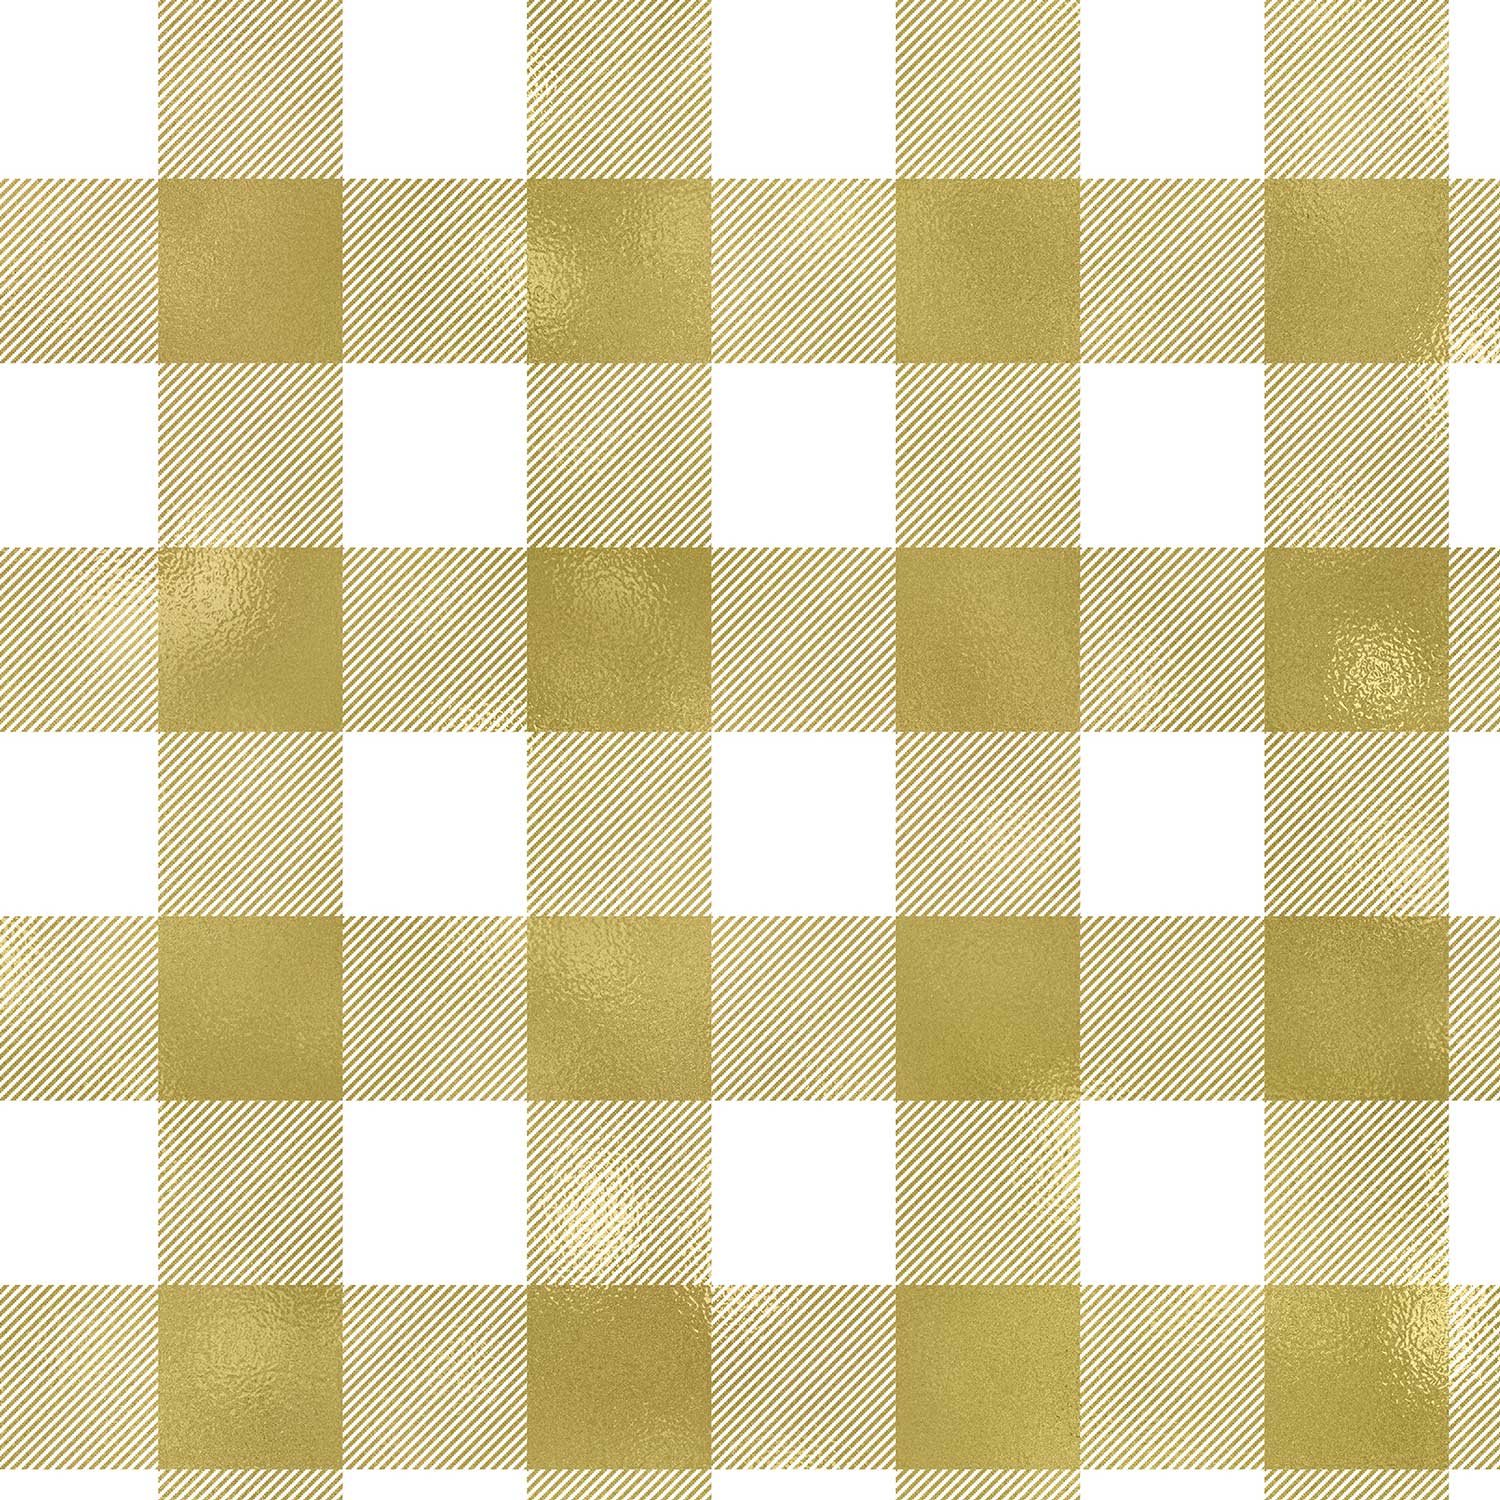 B716a Gold White Plaid Gift Wrapping Paper Swatch 